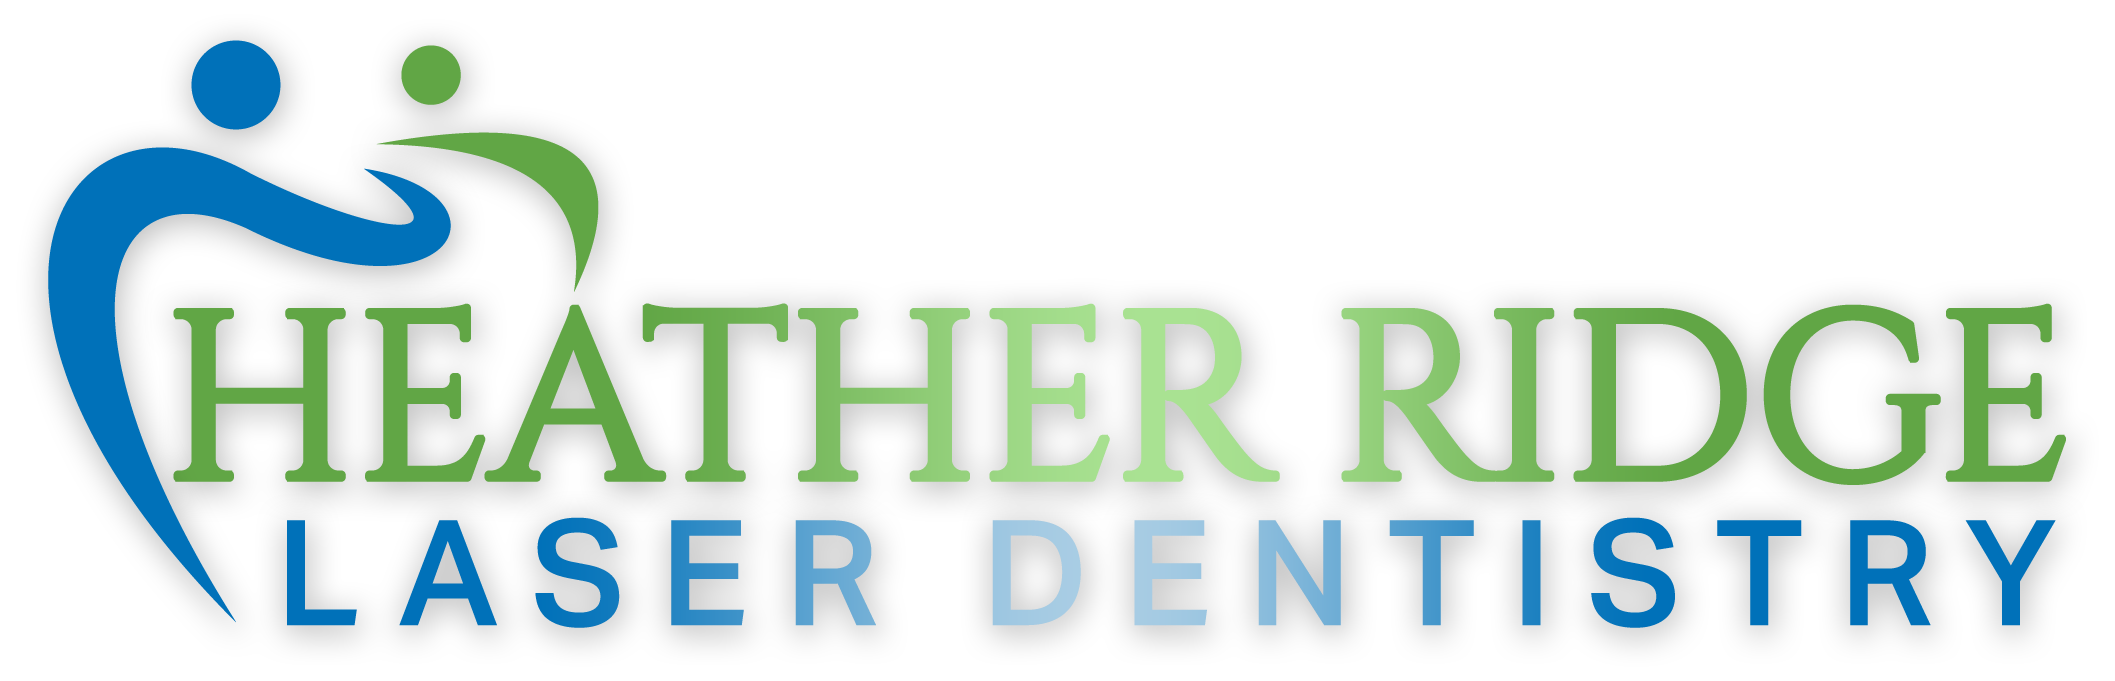 heather ridge laser dentistry logo with transparent background and shadow glow